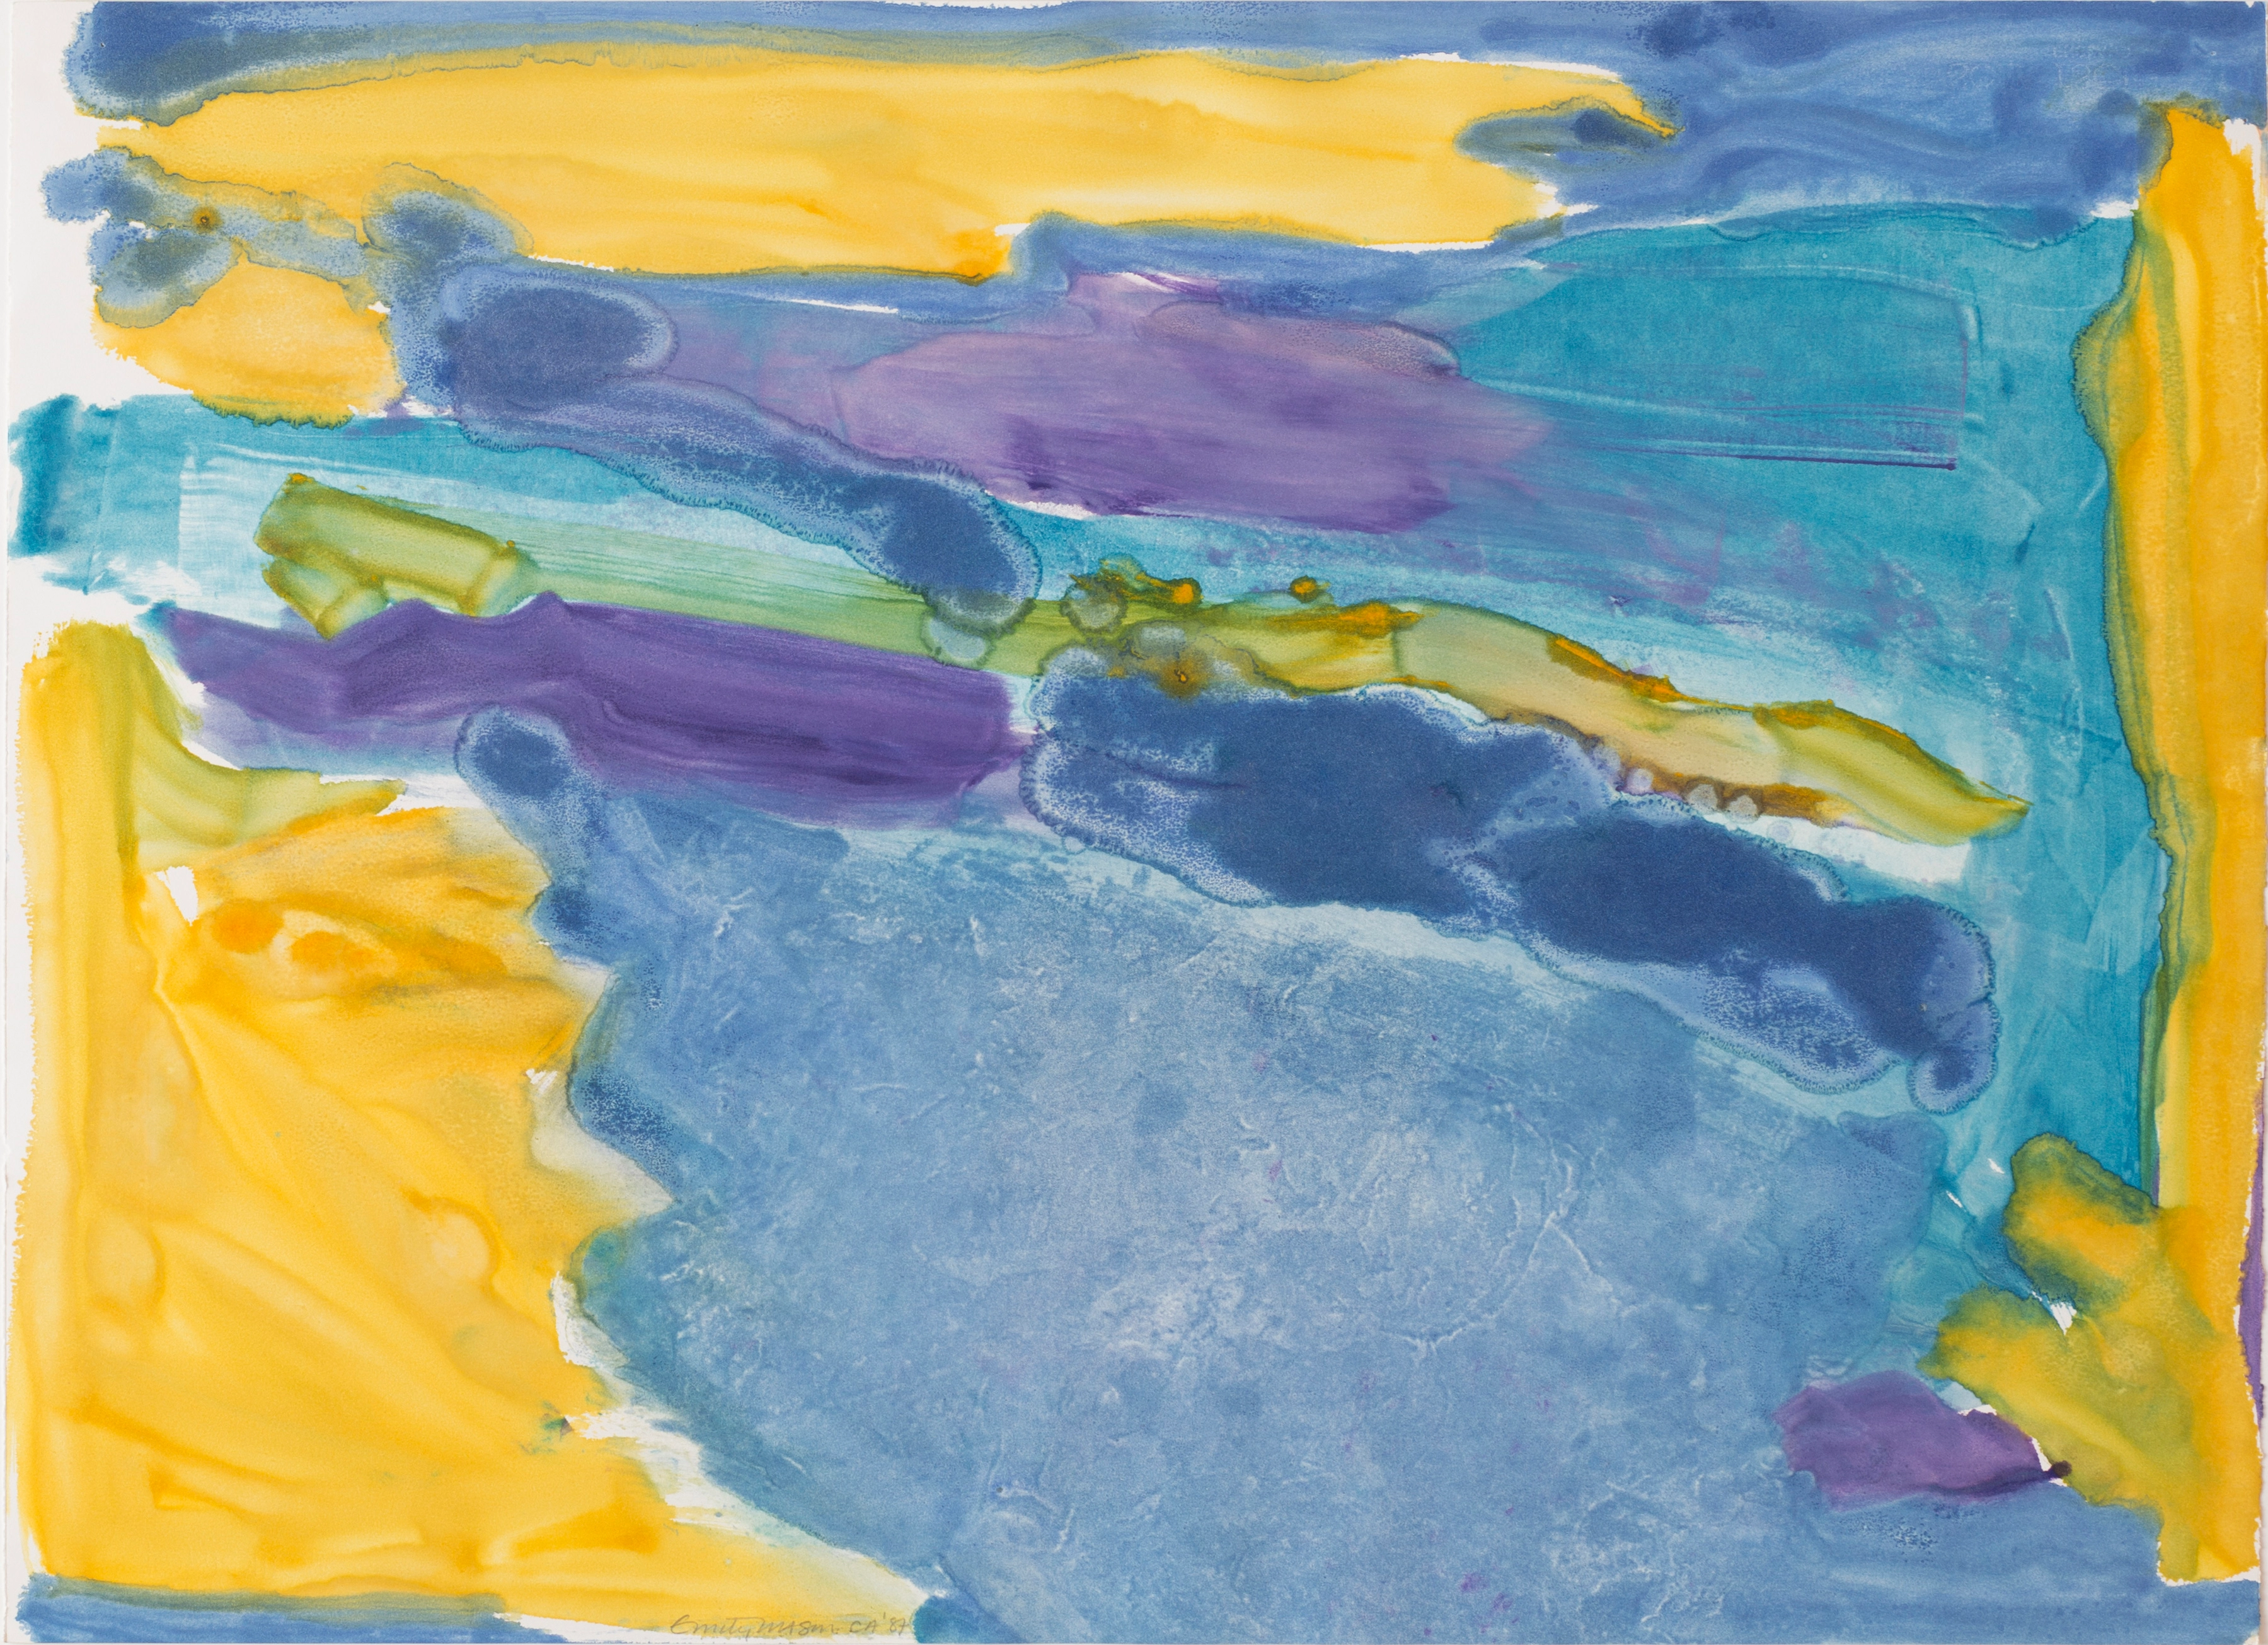 Abstract monotype print on paper with a blue background and bands of blue, yellow, purple, and green reaching from left to right on the canvas. Yellow forms border the composition at the top, left, and right.